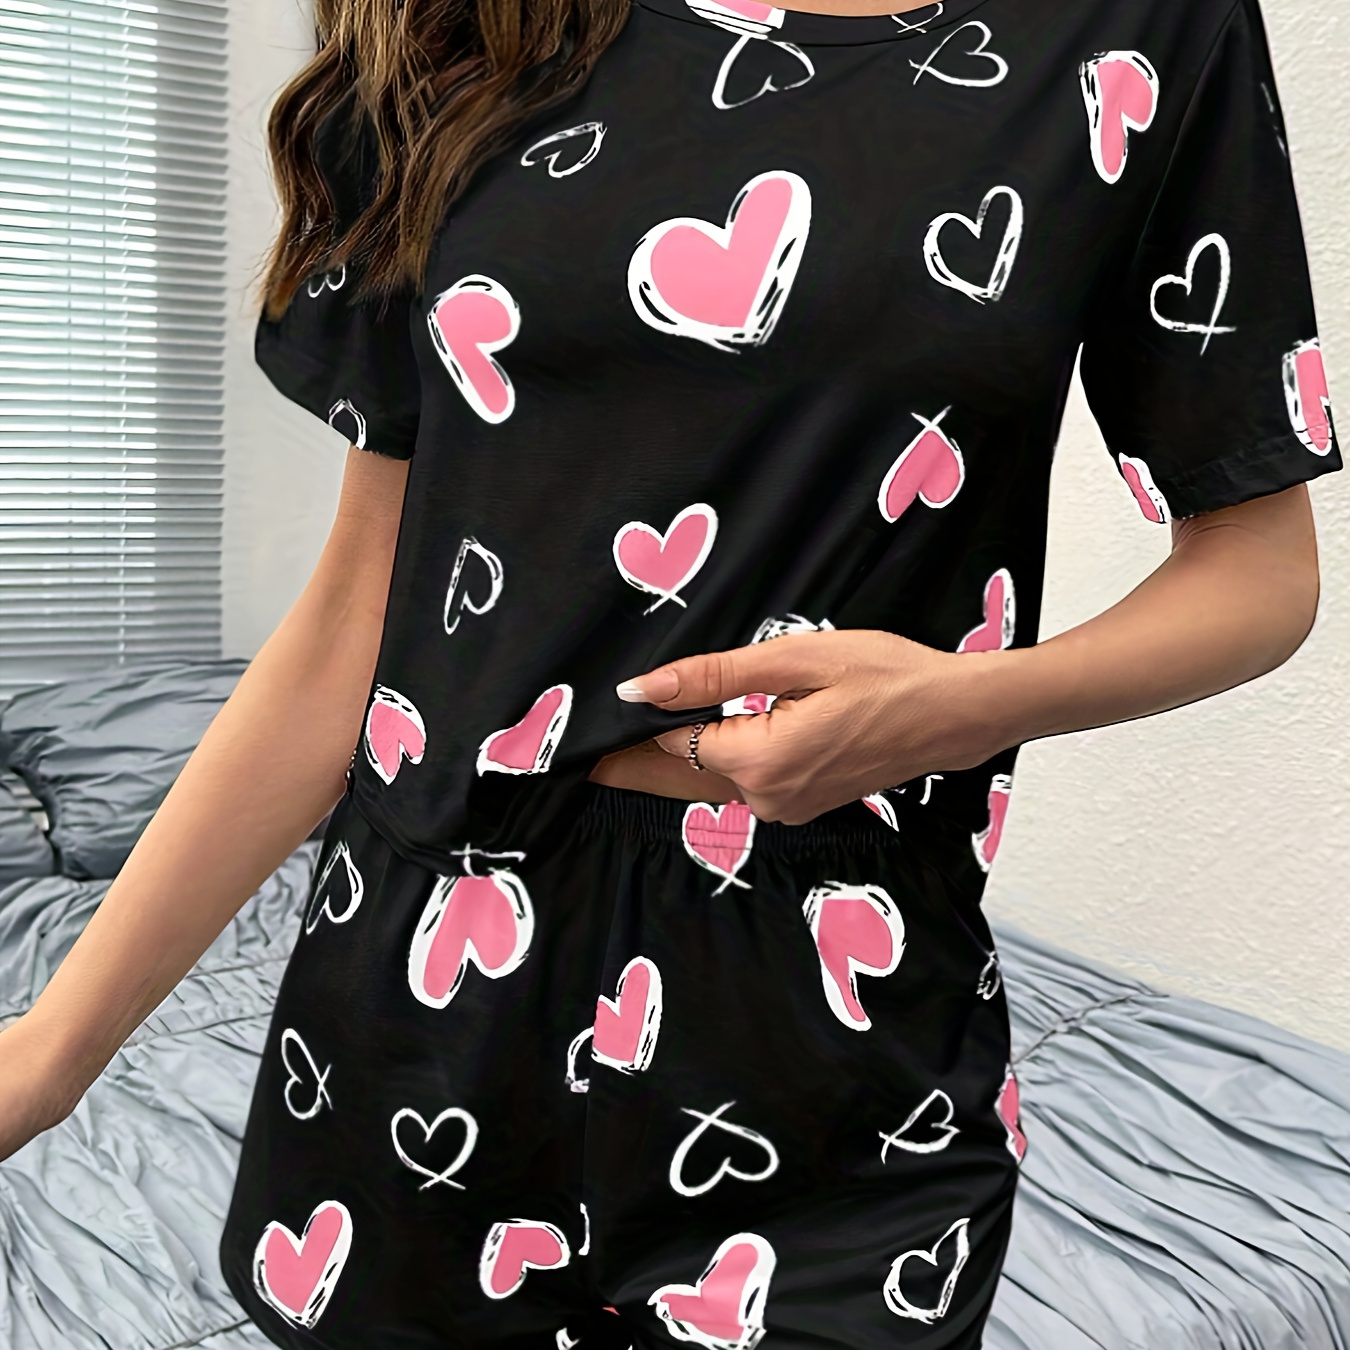 

Women's Allover Heart Print Casual Pajama Set, Short Sleeve Round Neck Top & Shorts, Comfortable Relaxed Fit